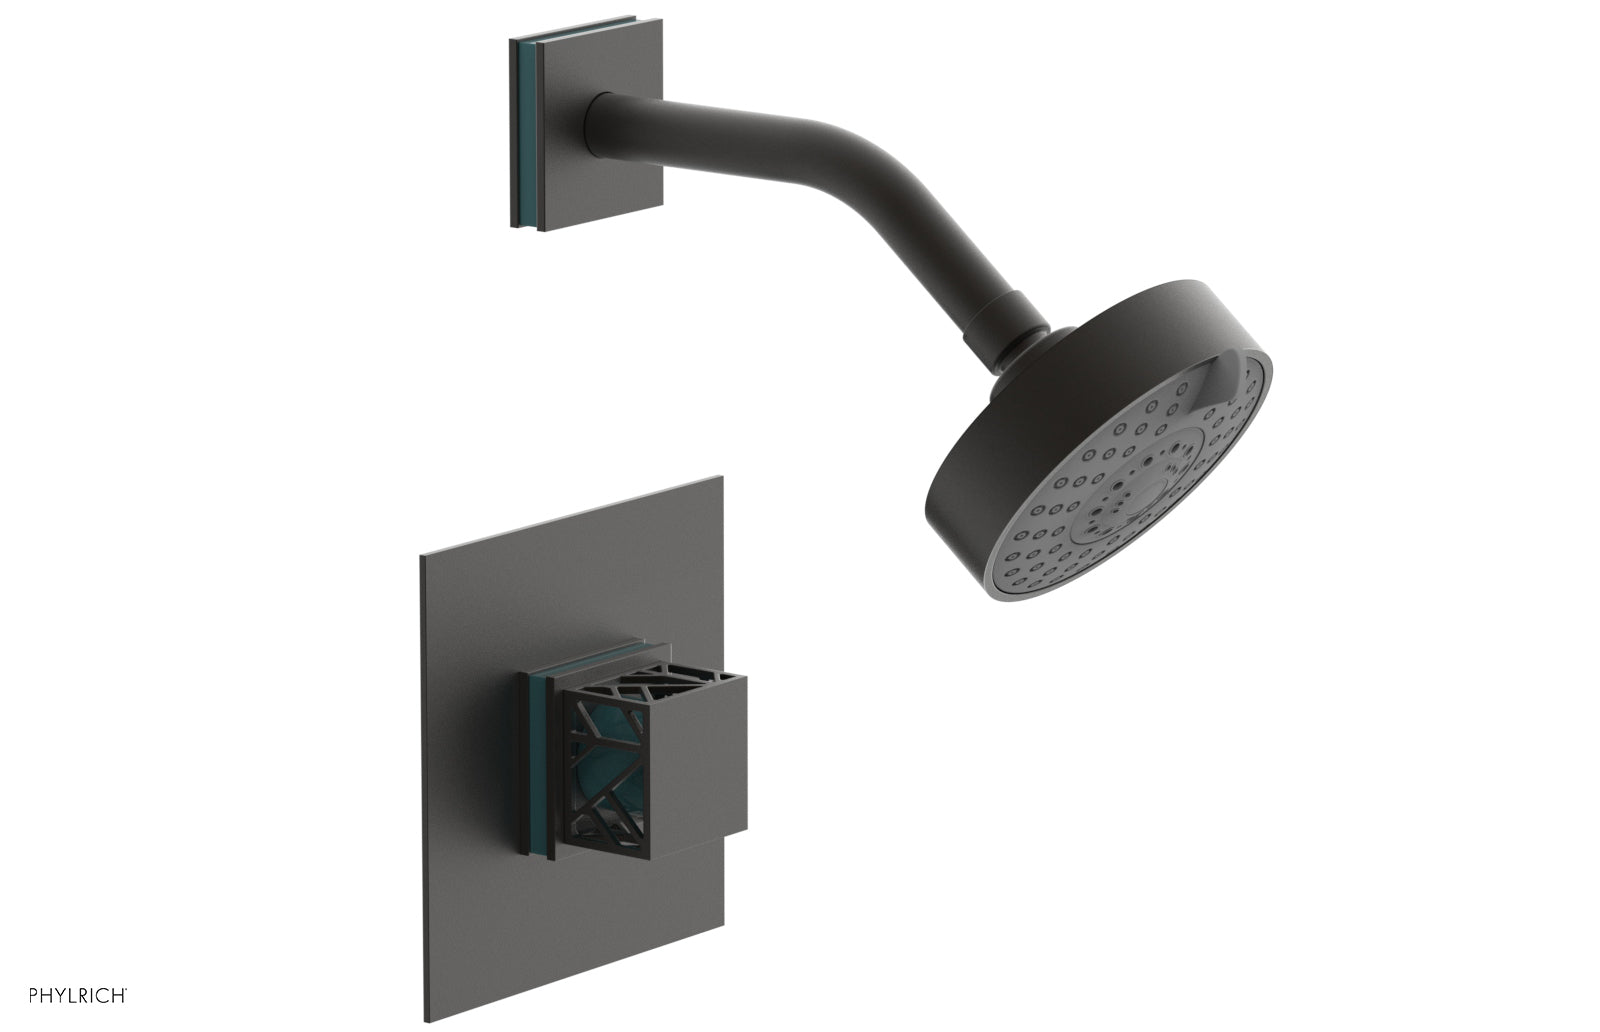 Phylrich JOLIE Pressure Balance Shower Set - Square Handle with "Turquoise" Accents